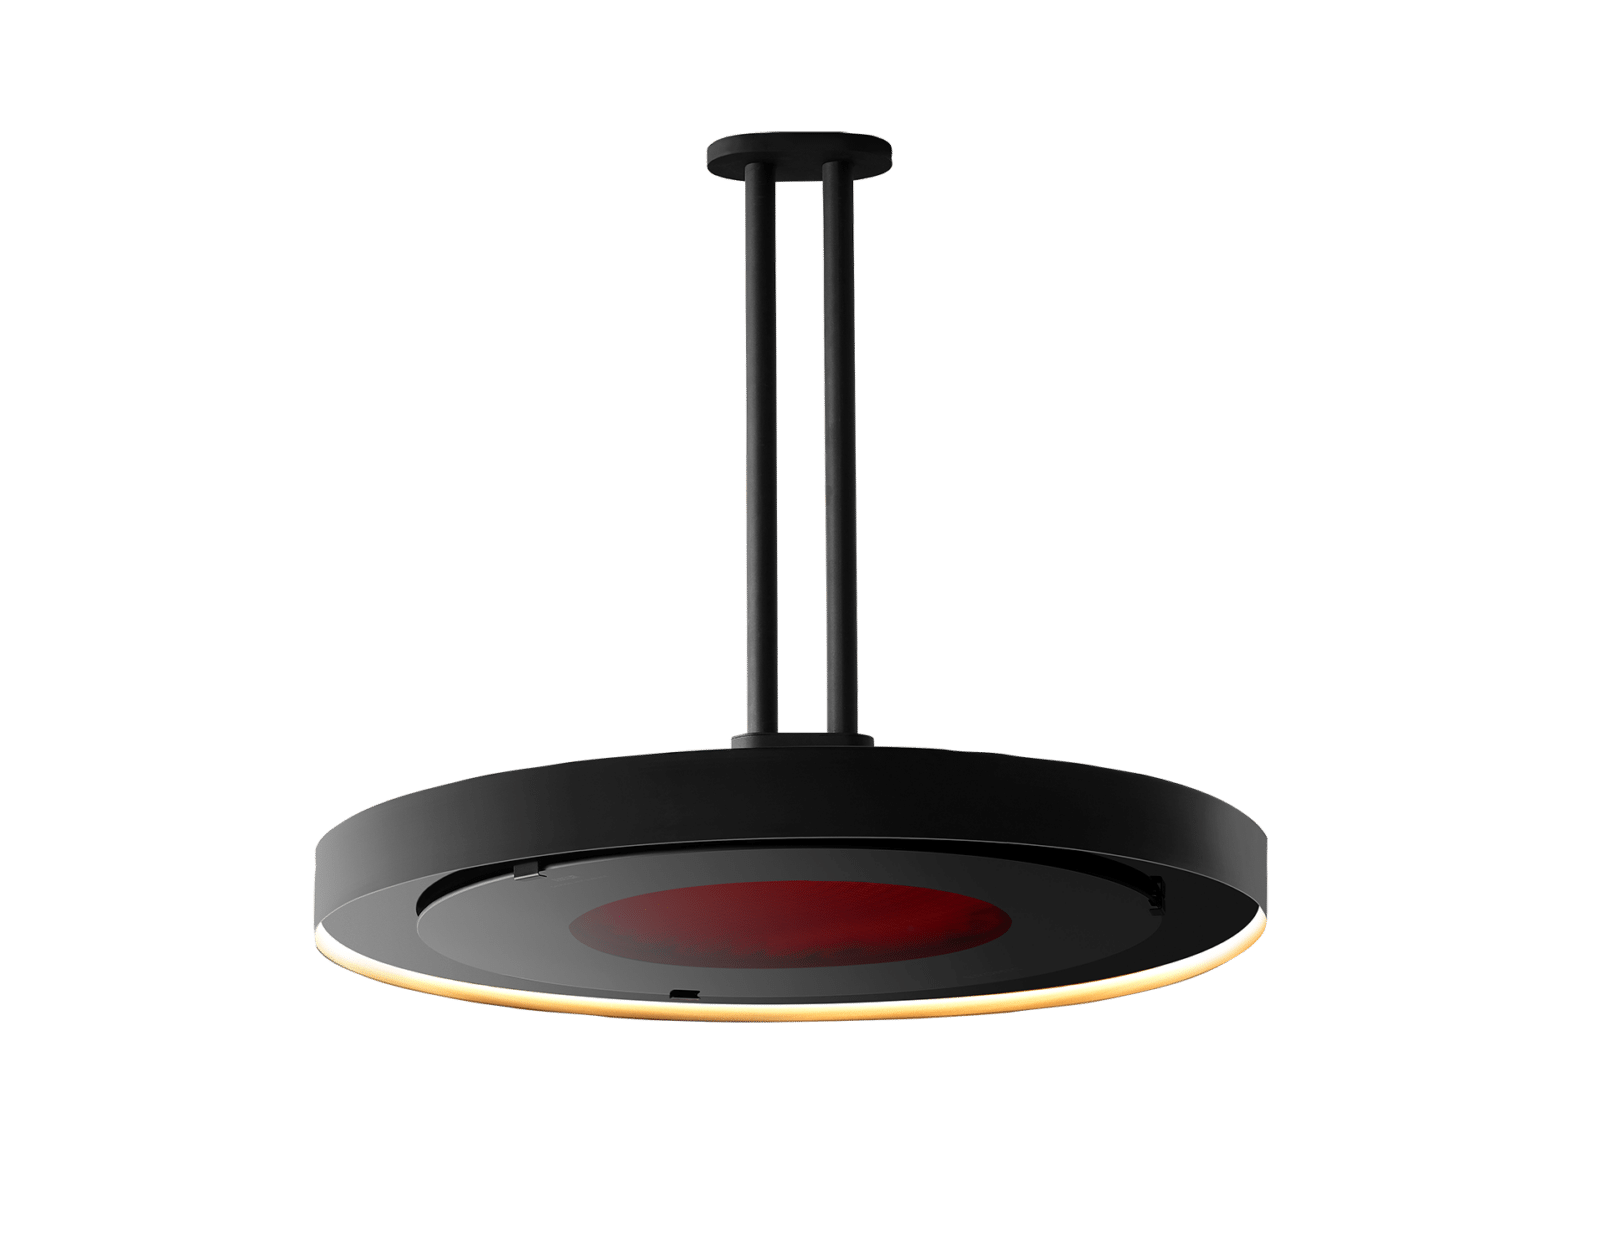 Electric Outdoor Heater - Ceiling Mount